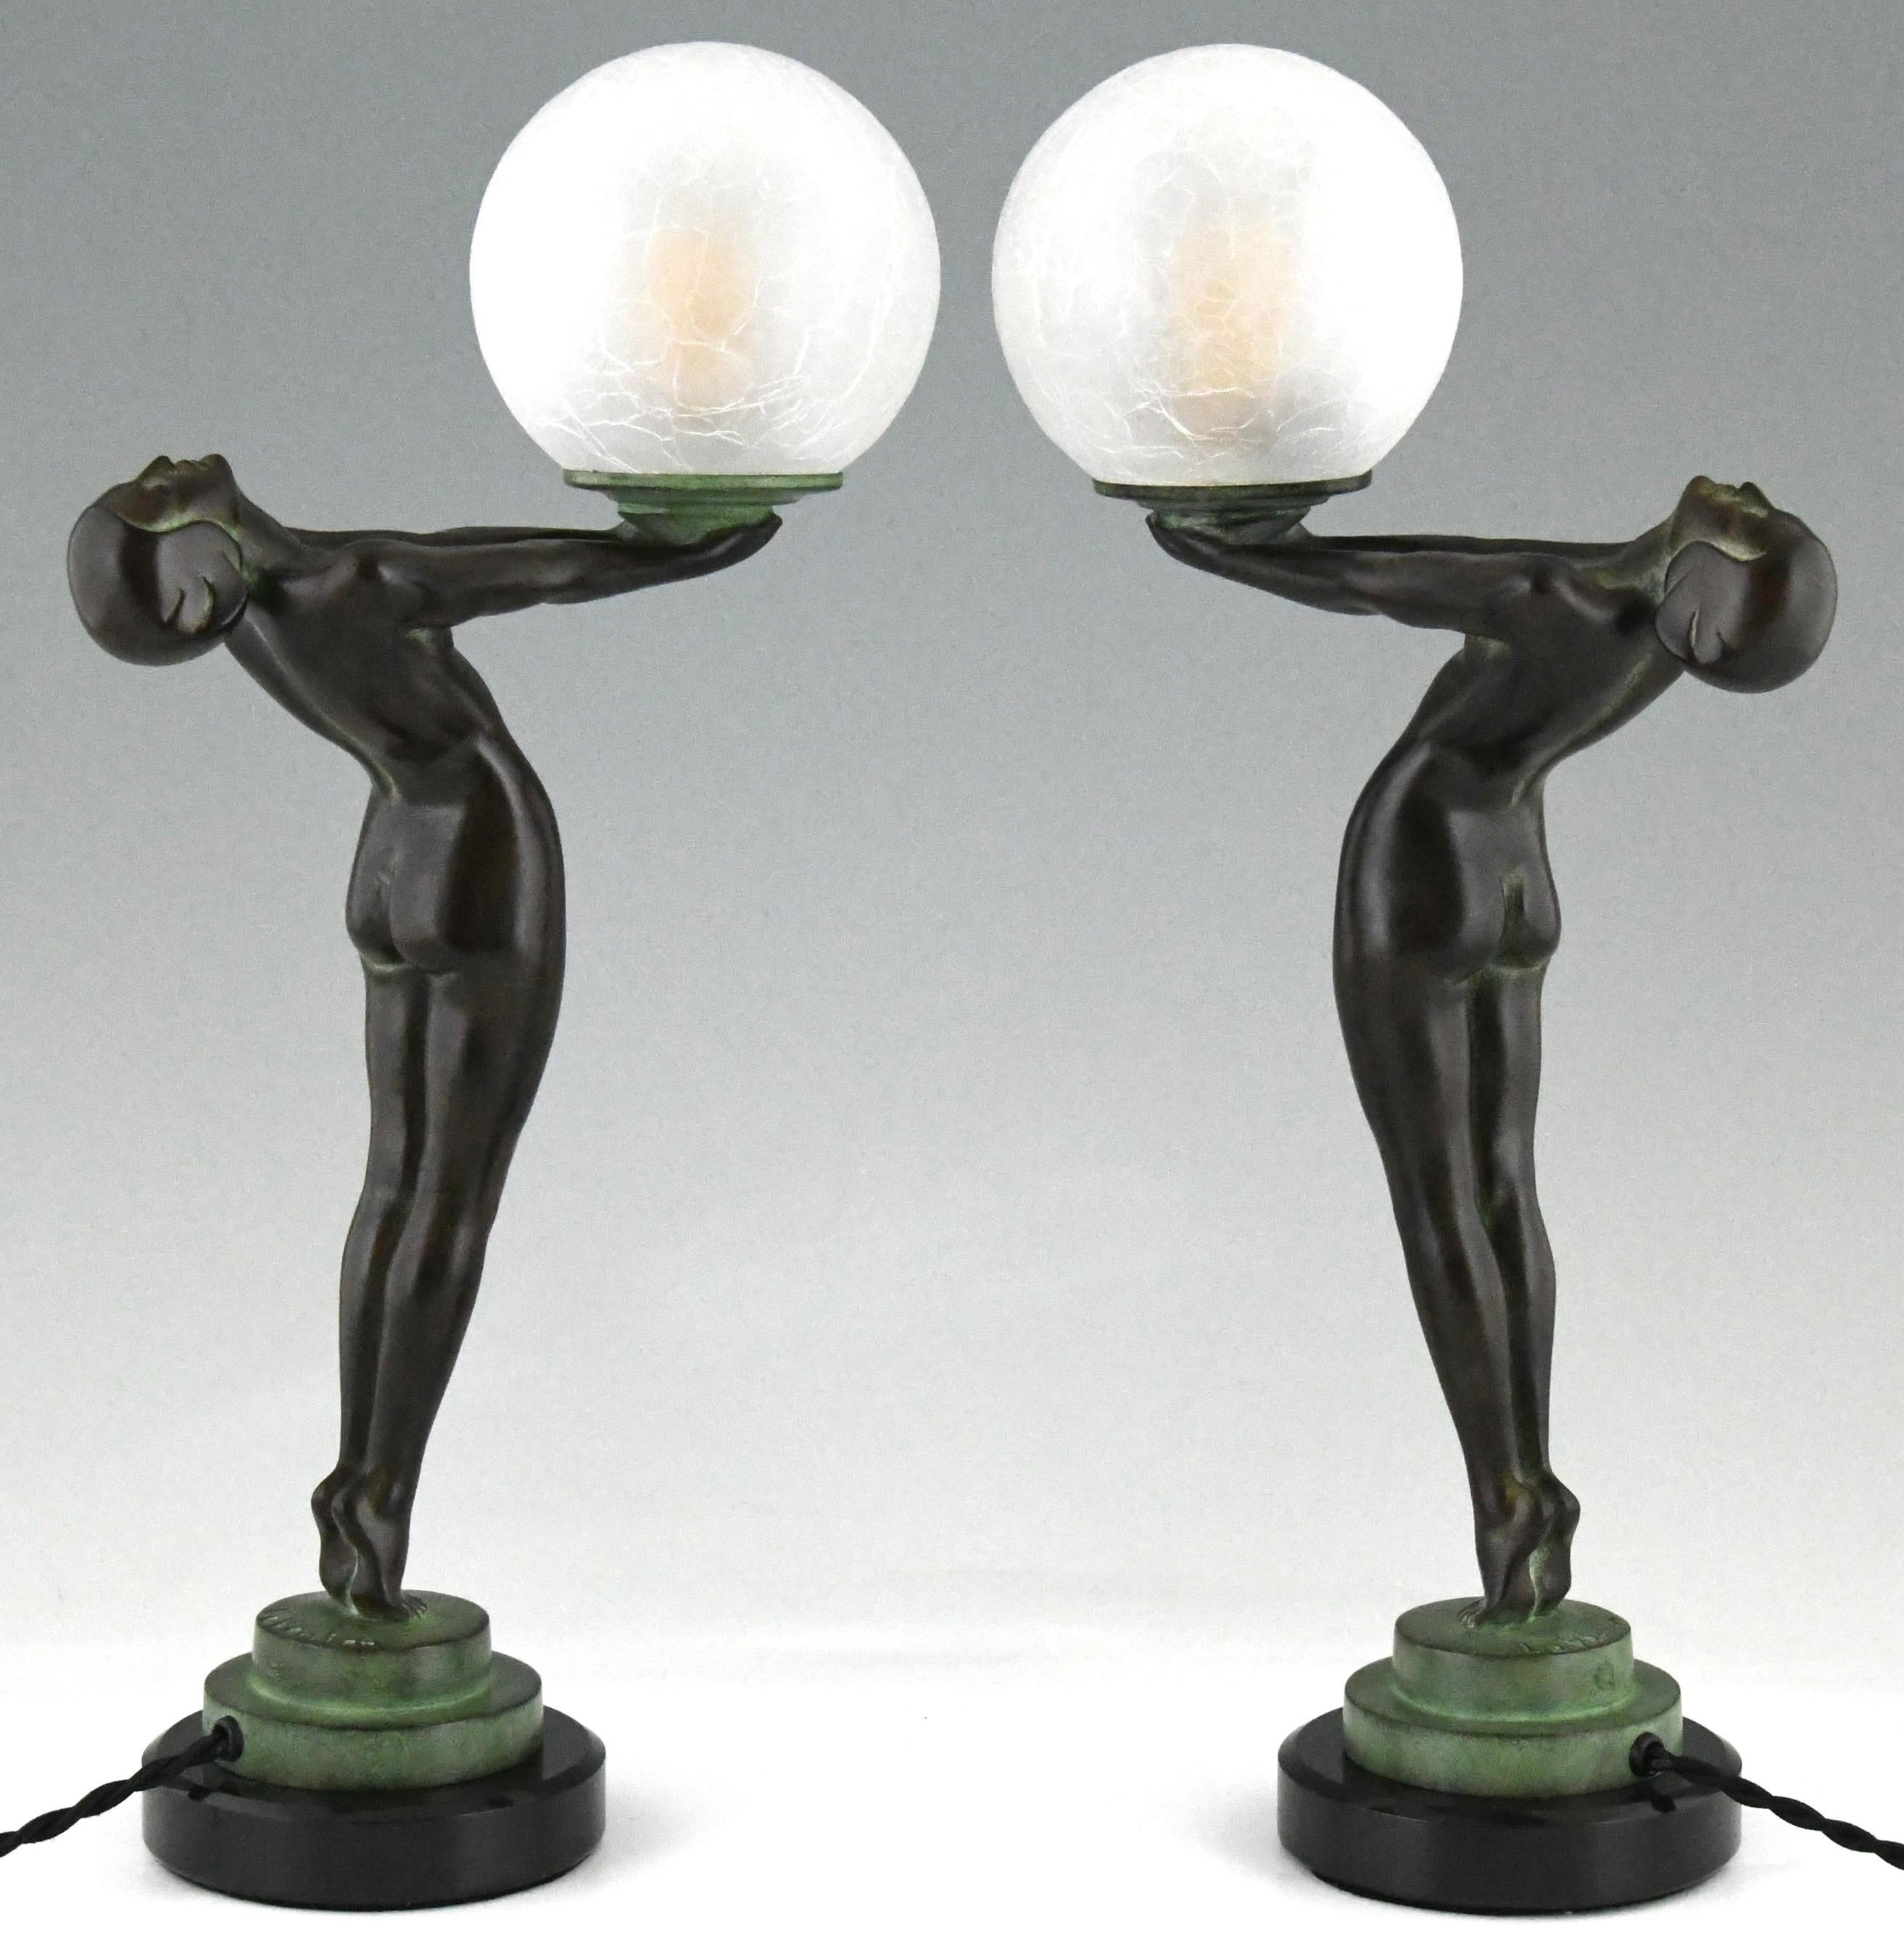 French Pair of Art Deco Style Lamps Clarté Standing Nude with Globe by Max Le Verrier